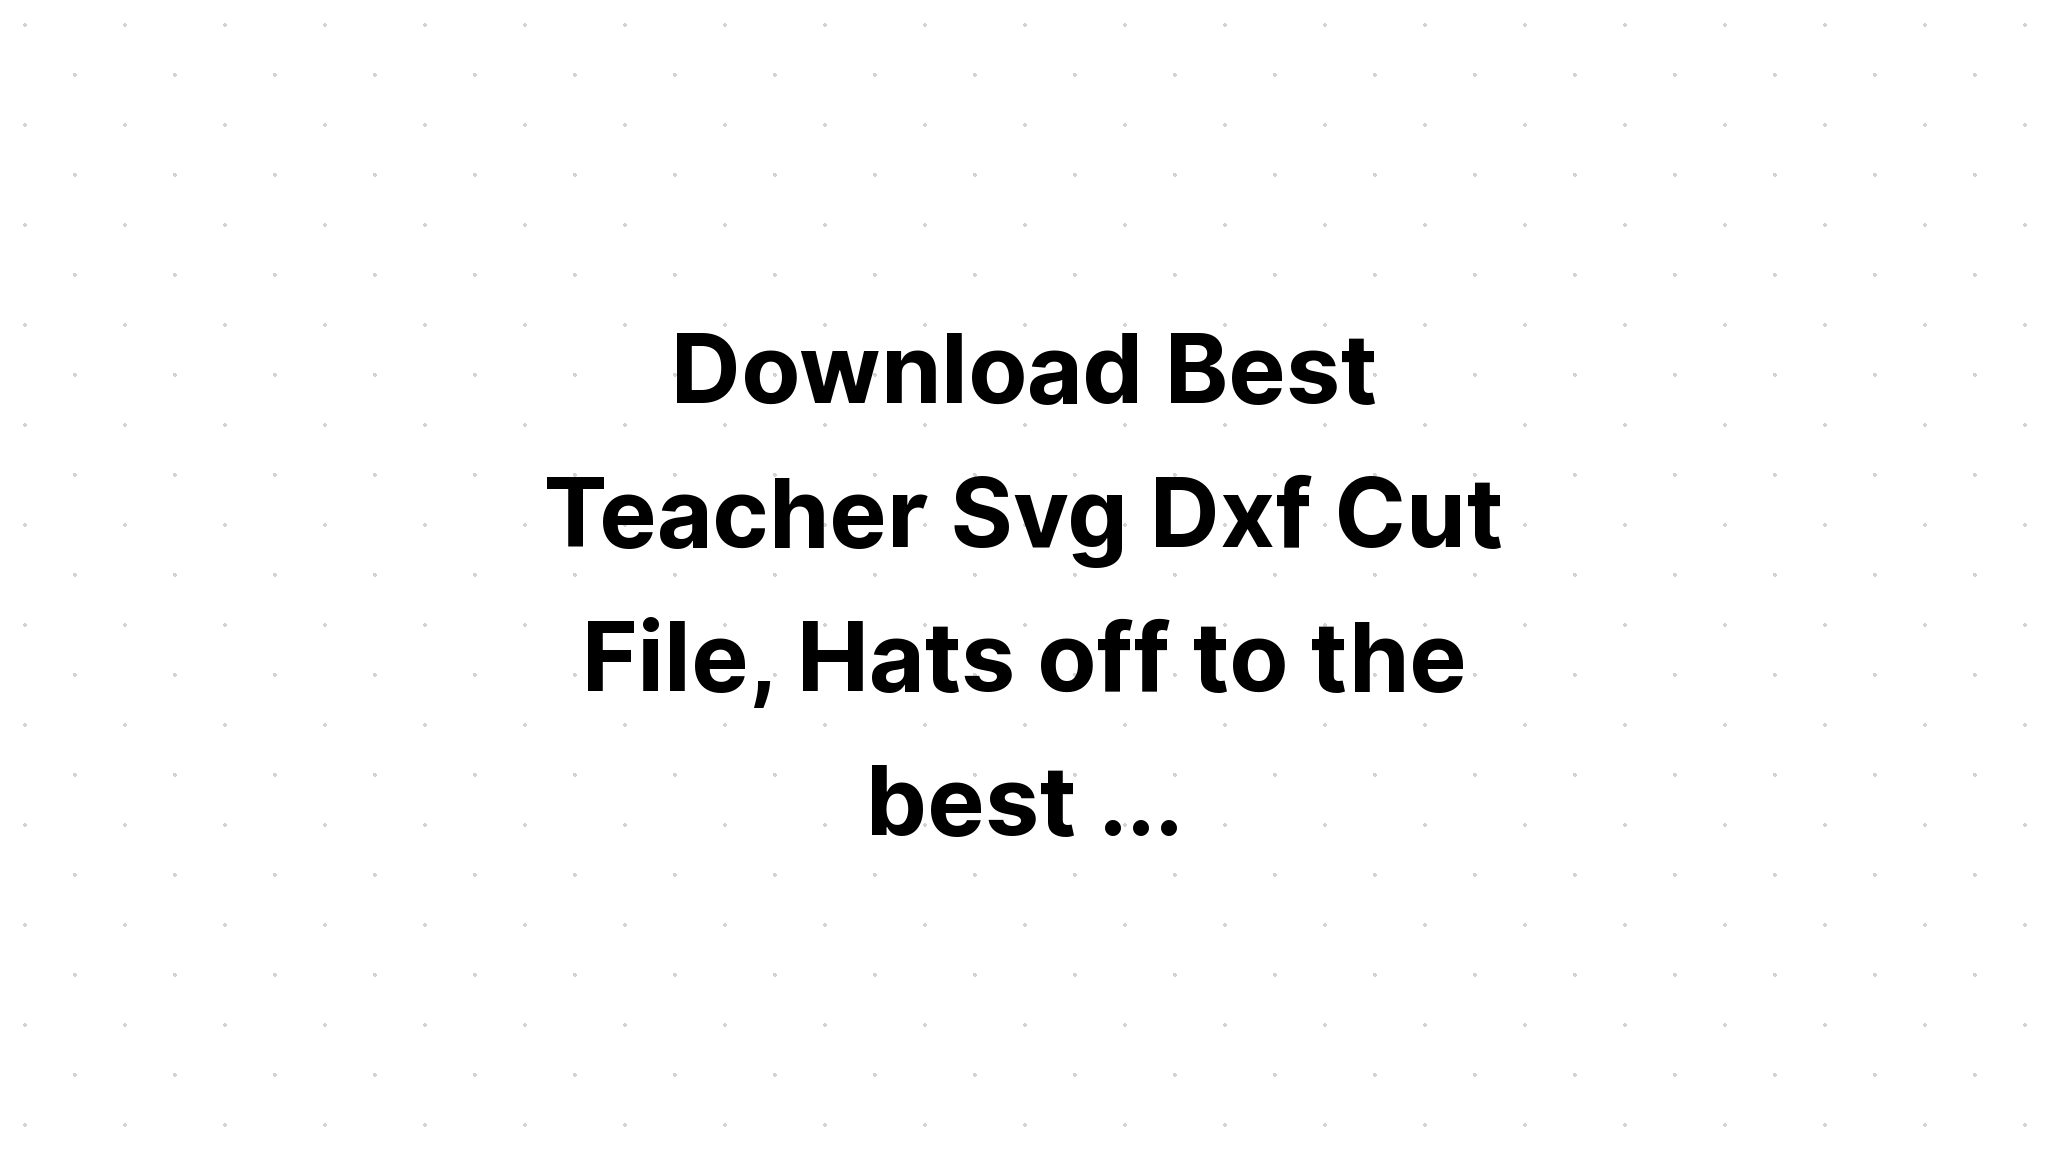 Download Resize Svg Cuta Off Content - Layered SVG Cut File